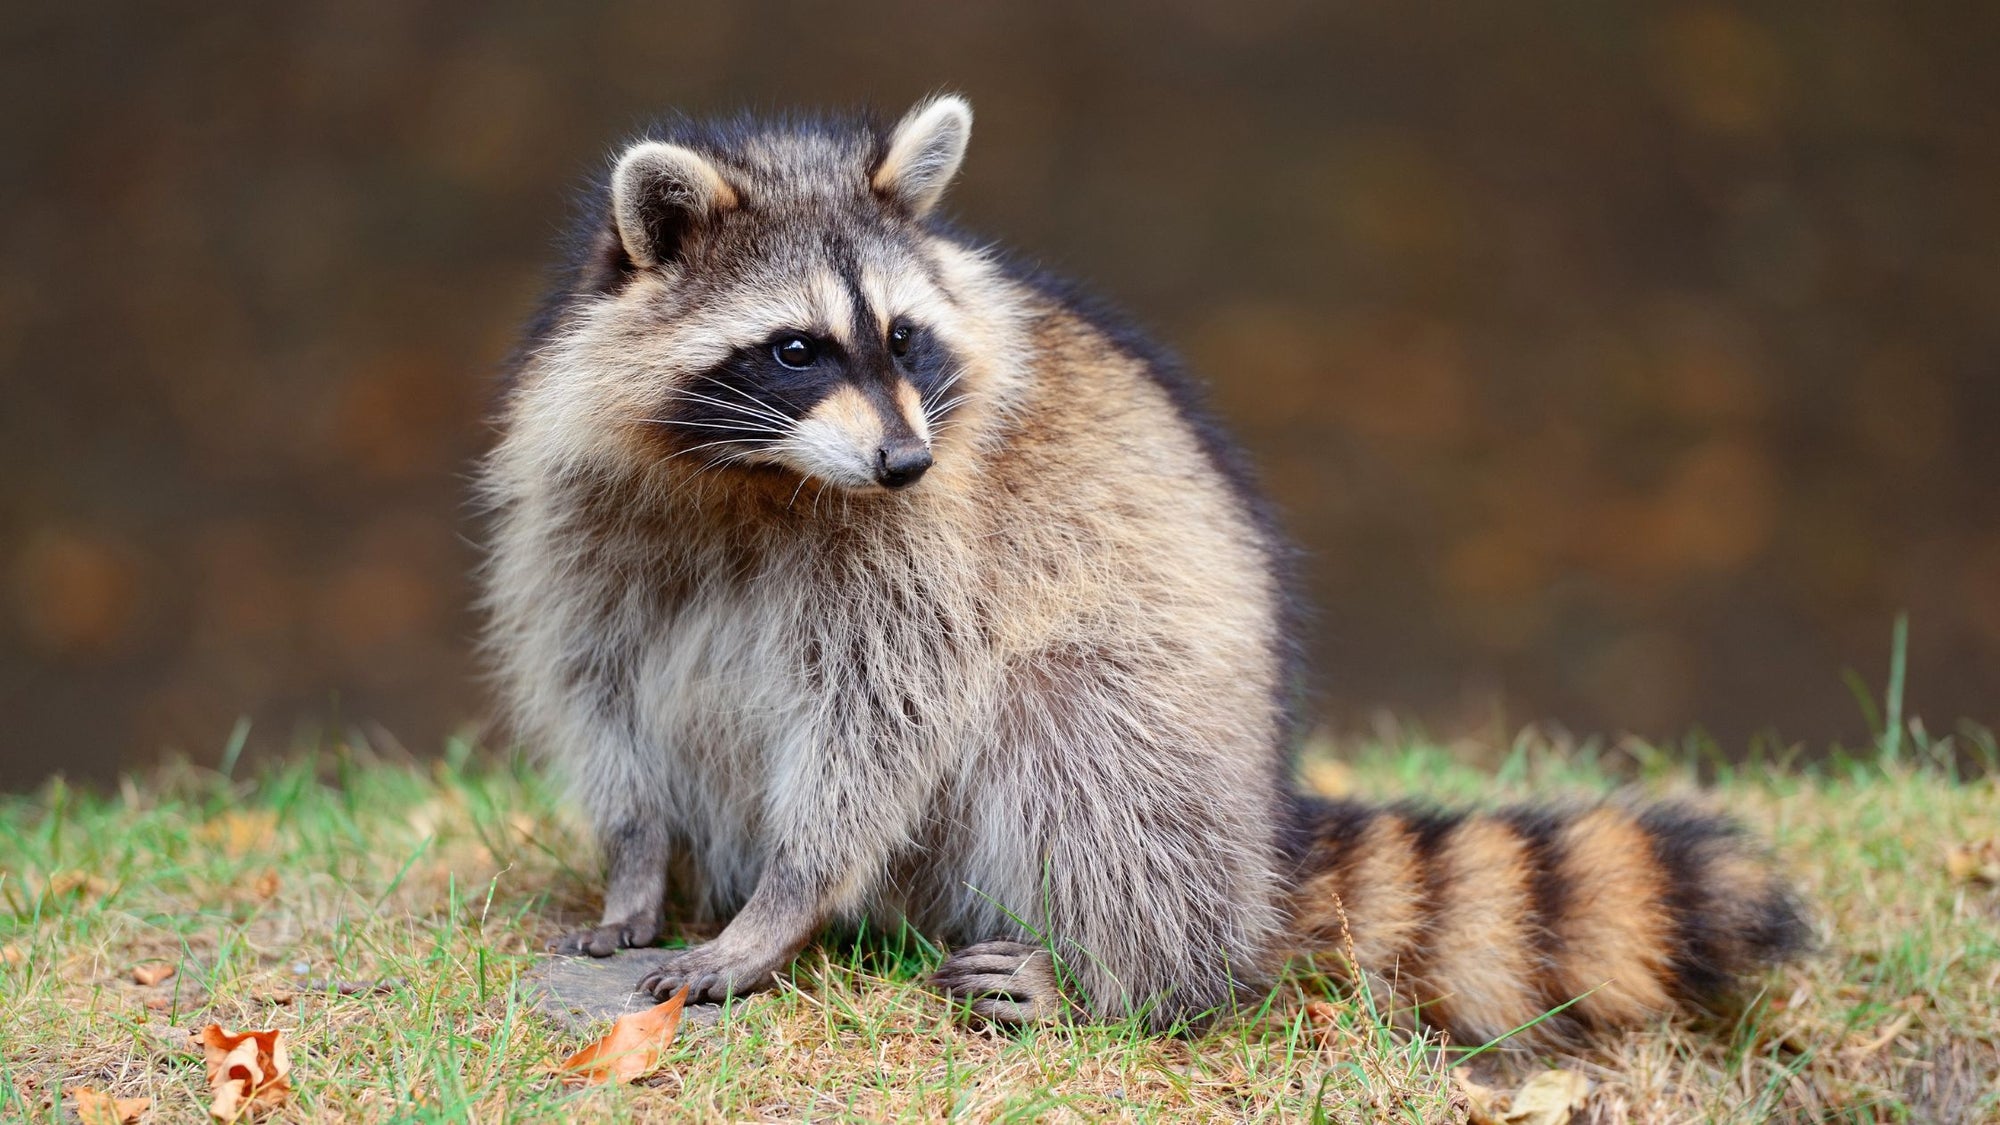 The Quirky World of Scavenger Animals - Raccoons!